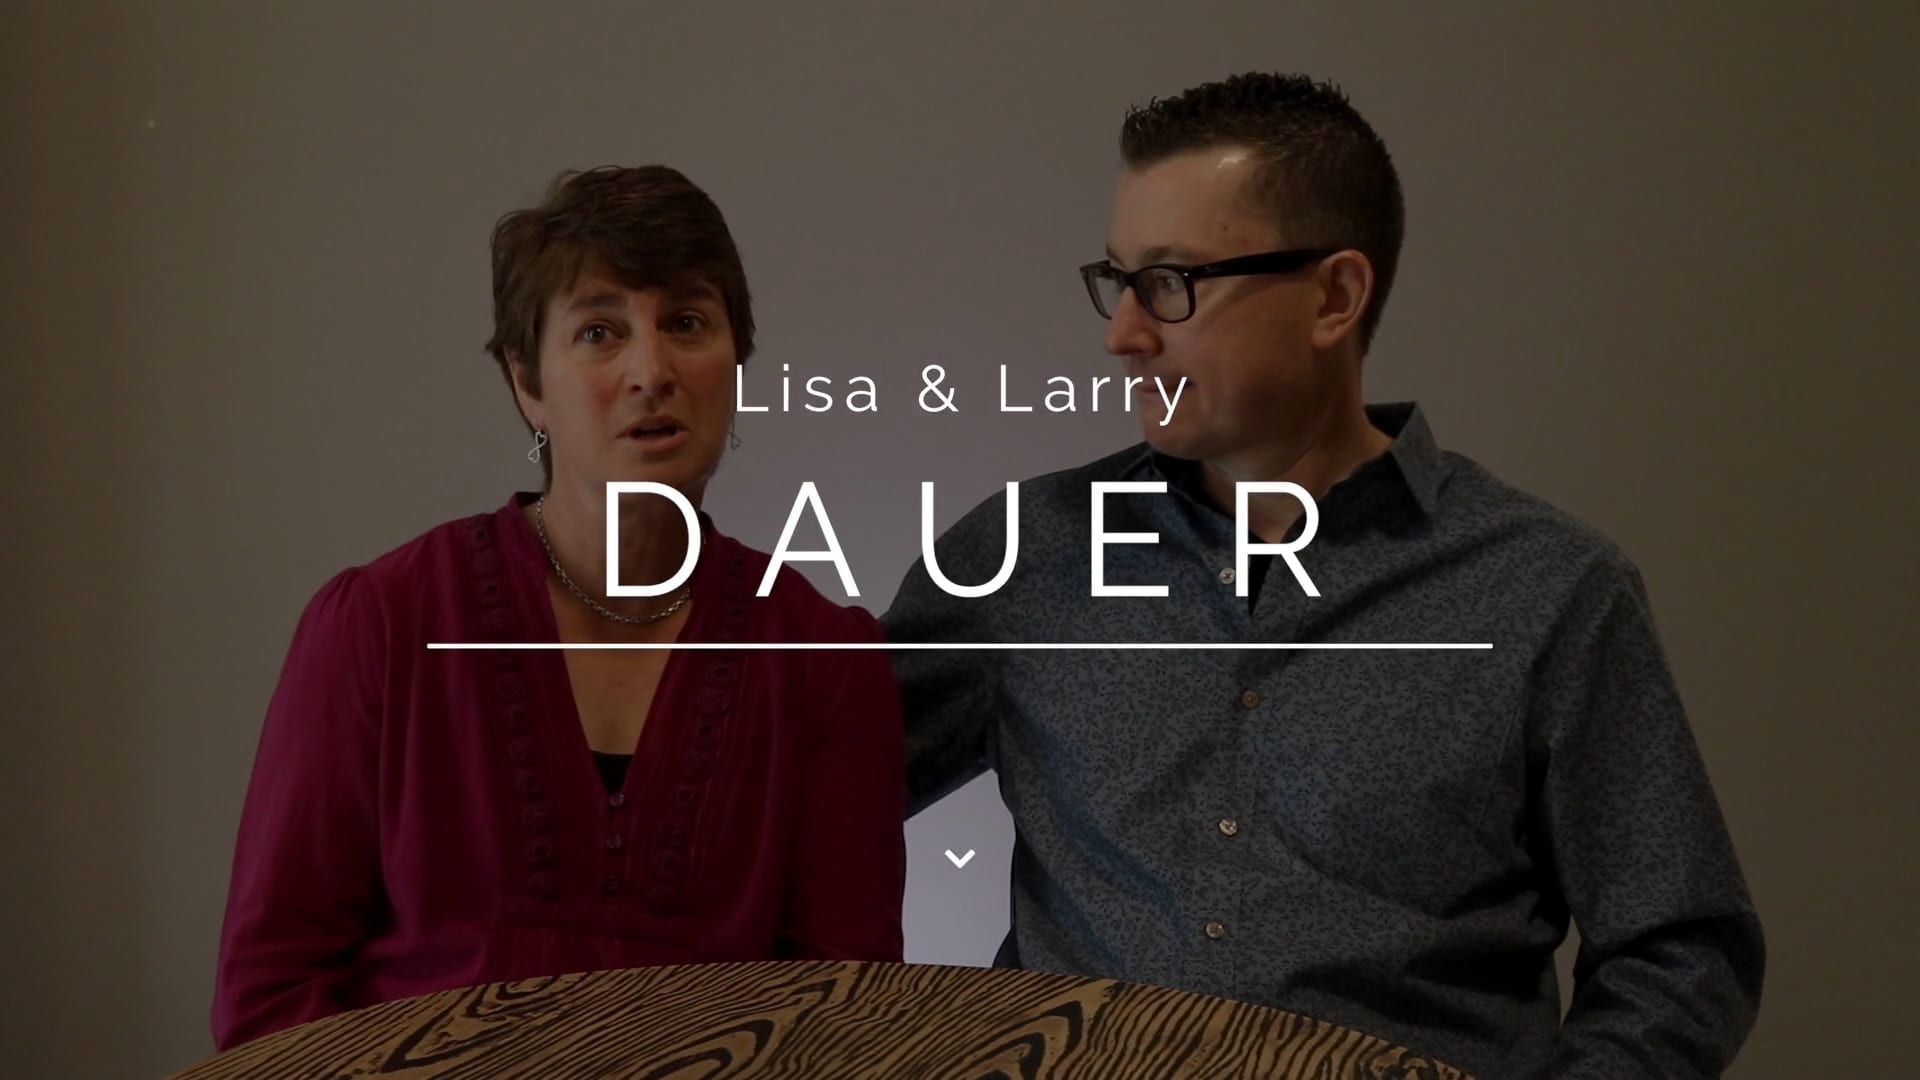 Lisa and larry Dauer